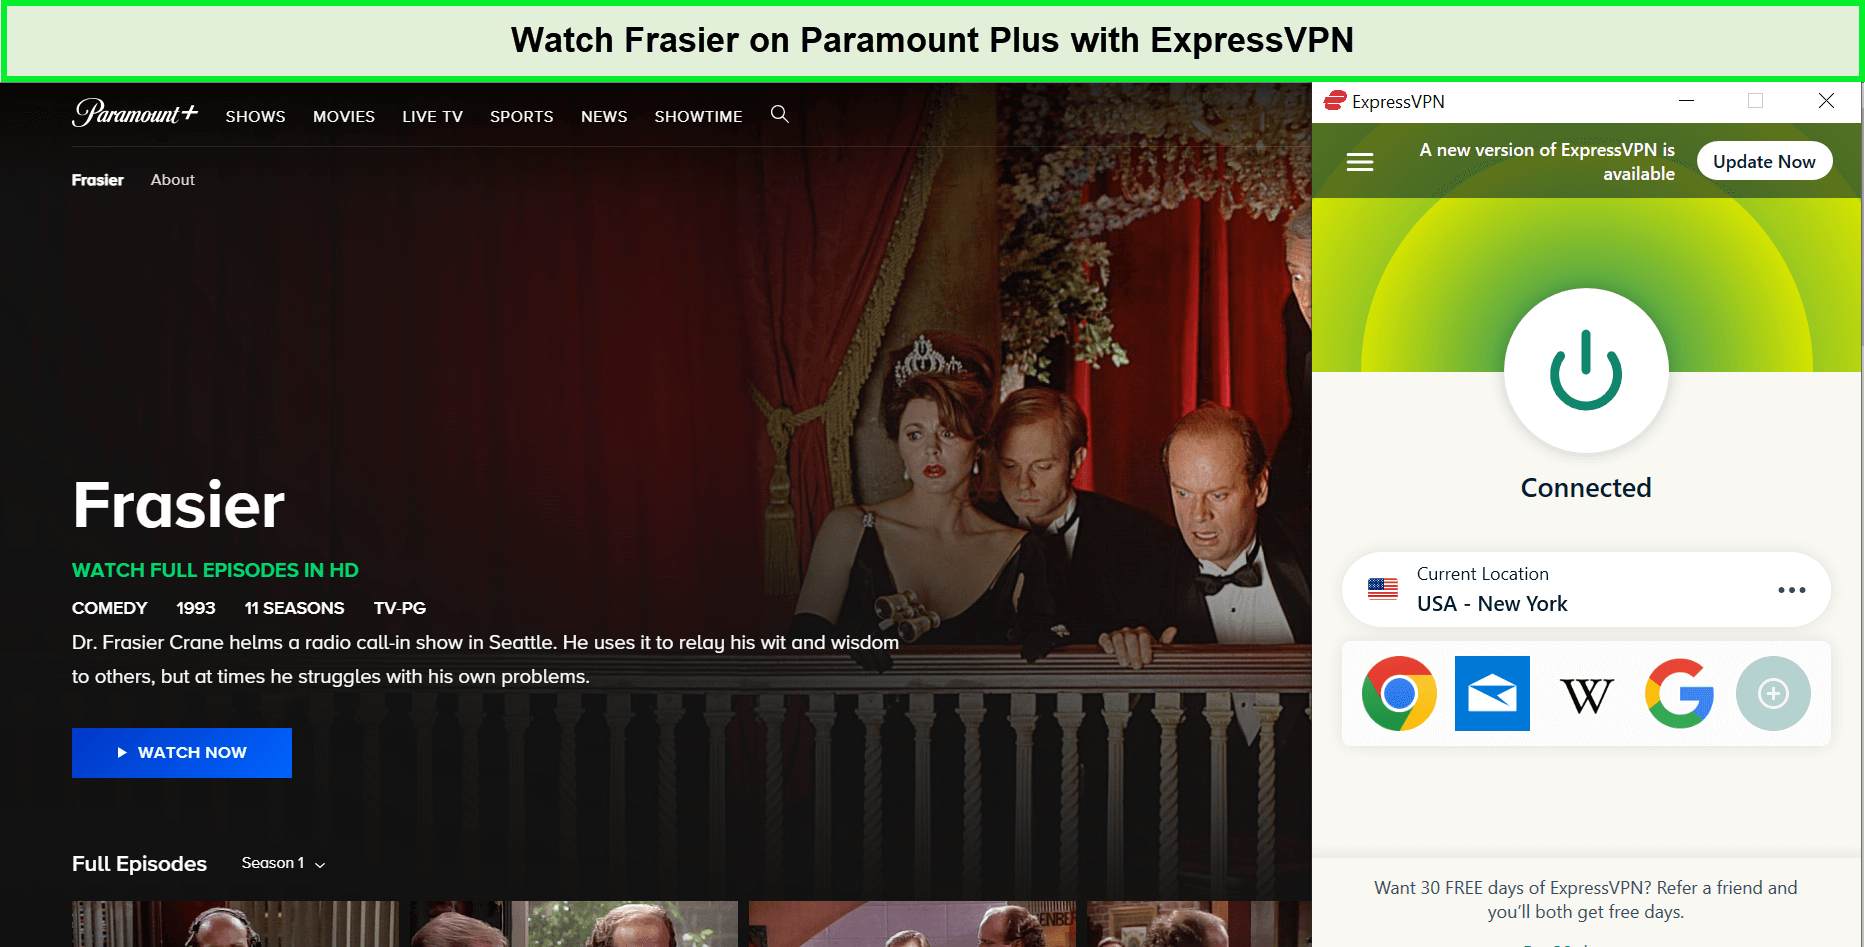 Watch-Frasier-on-Paramount-Plus-in-India-with-ExpressVPN